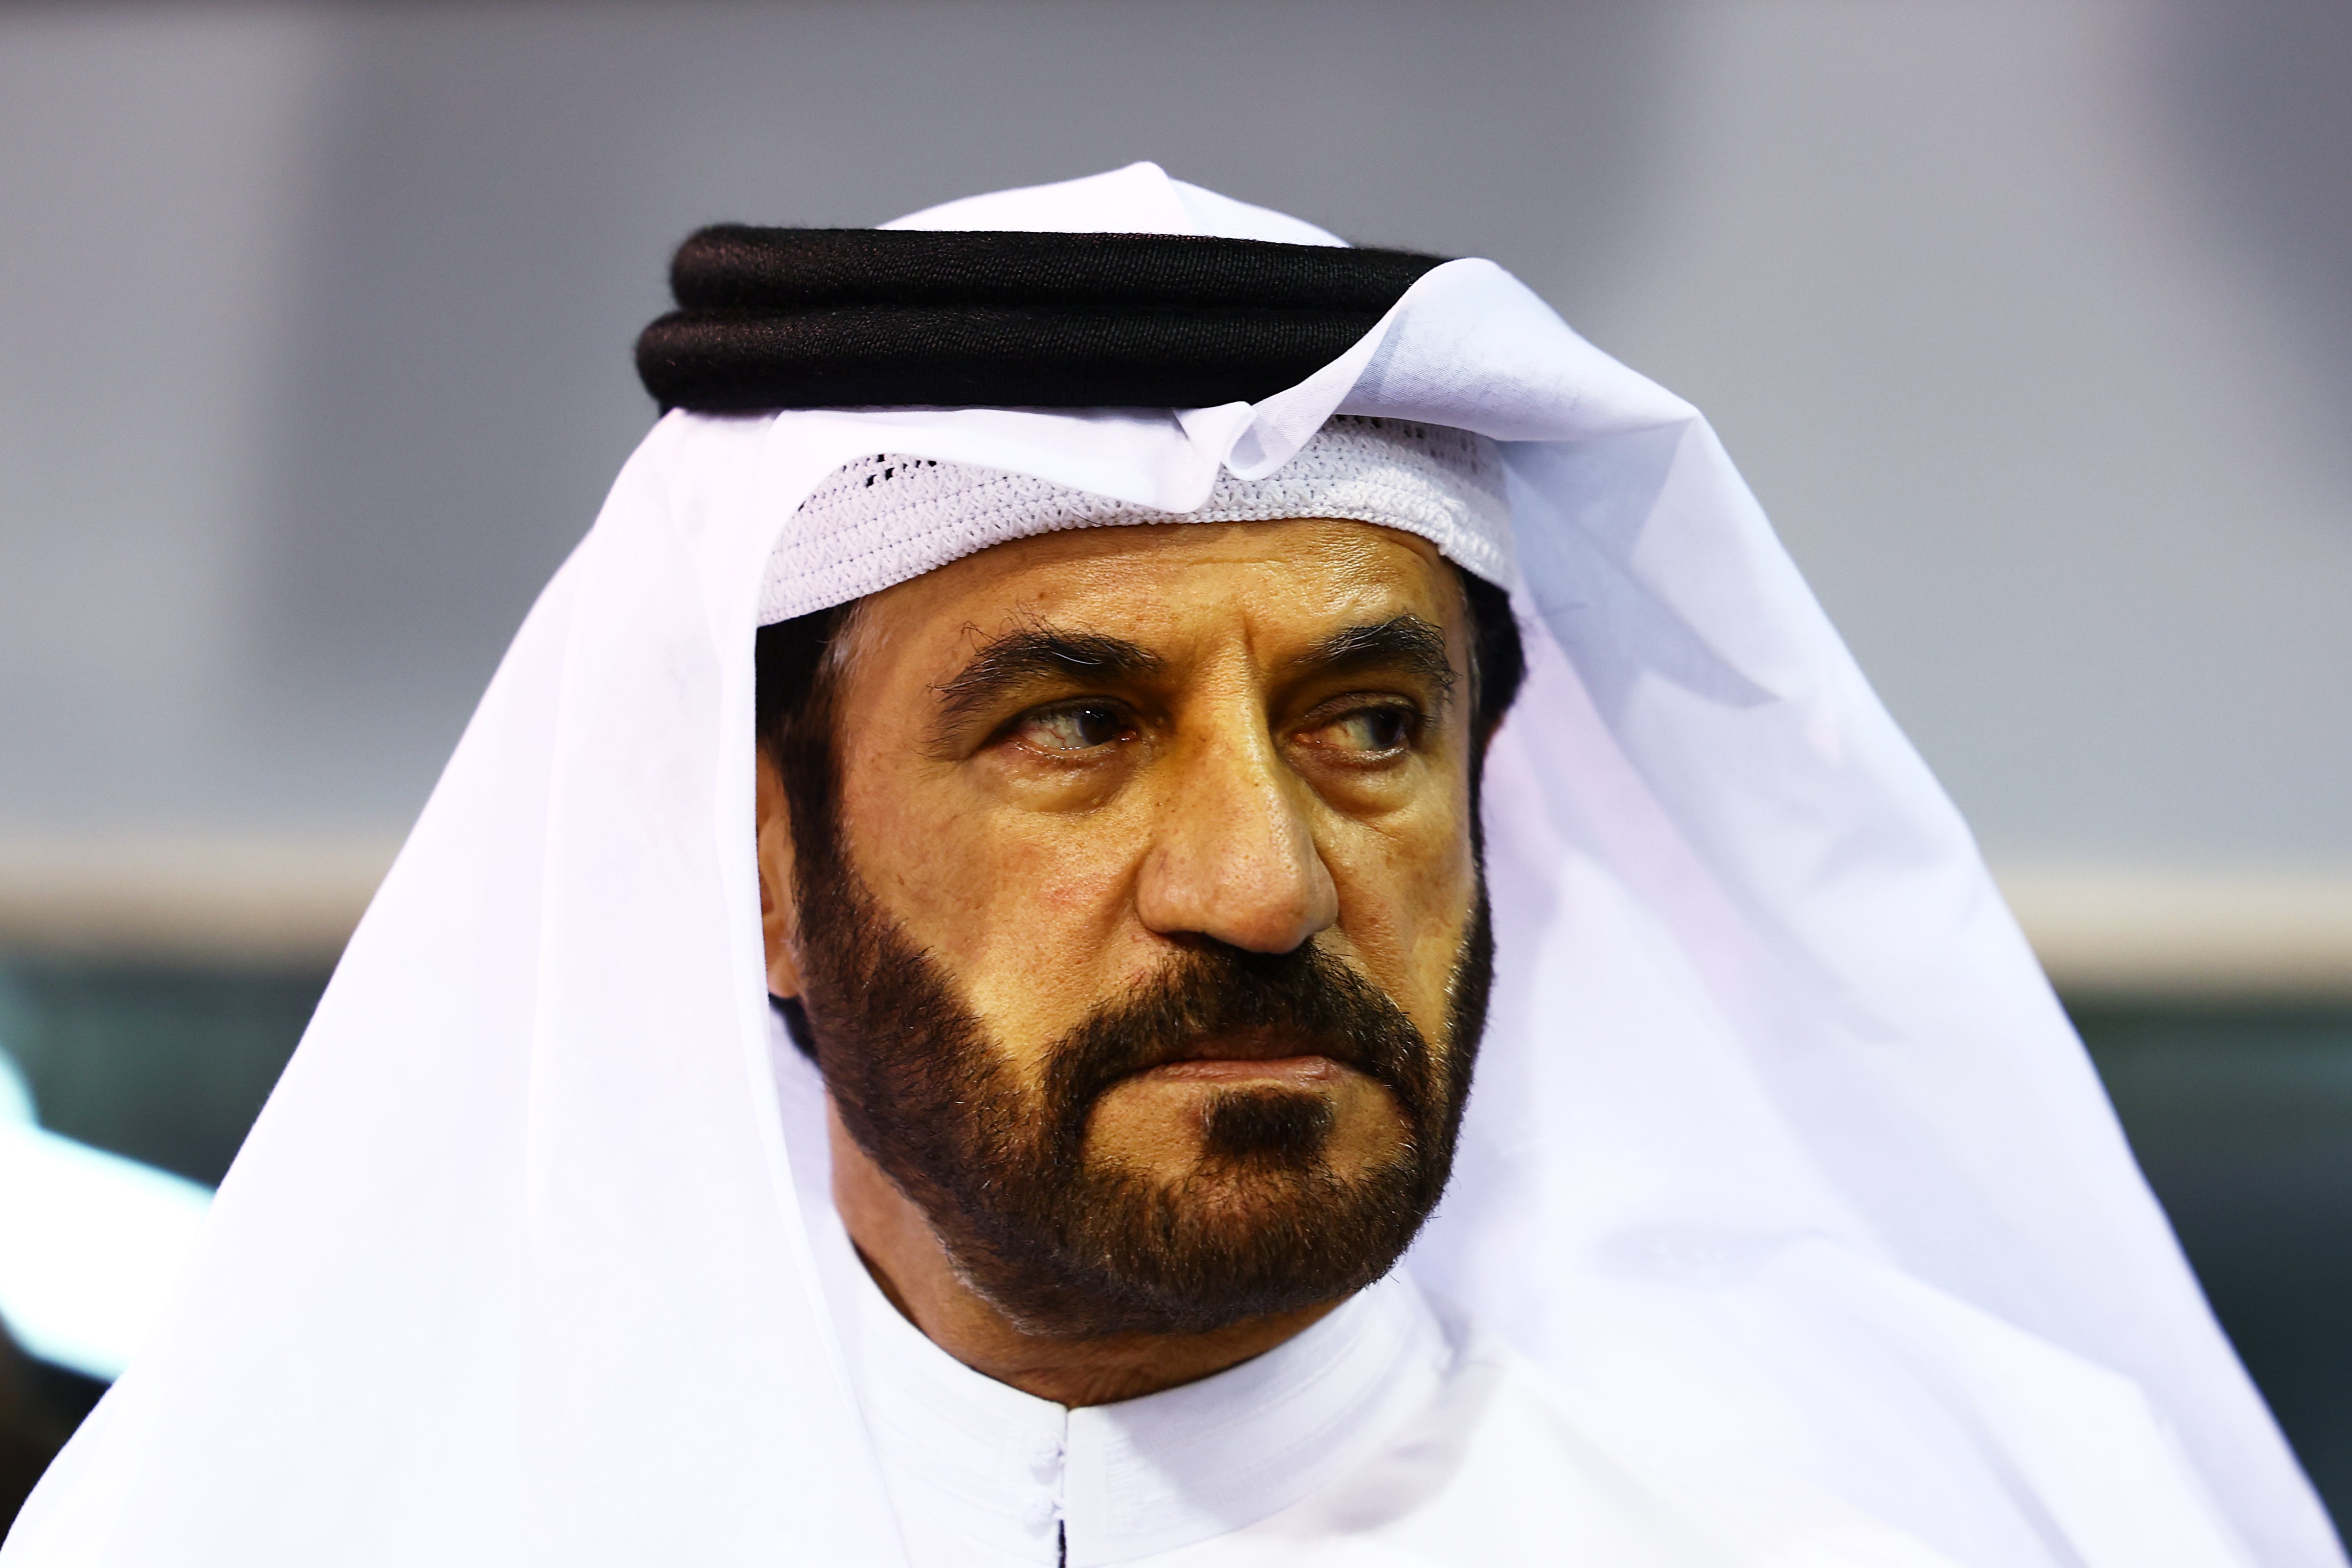 Mohammed Ben Sulayem is under investigation for allegedly interfering with an F1 race result